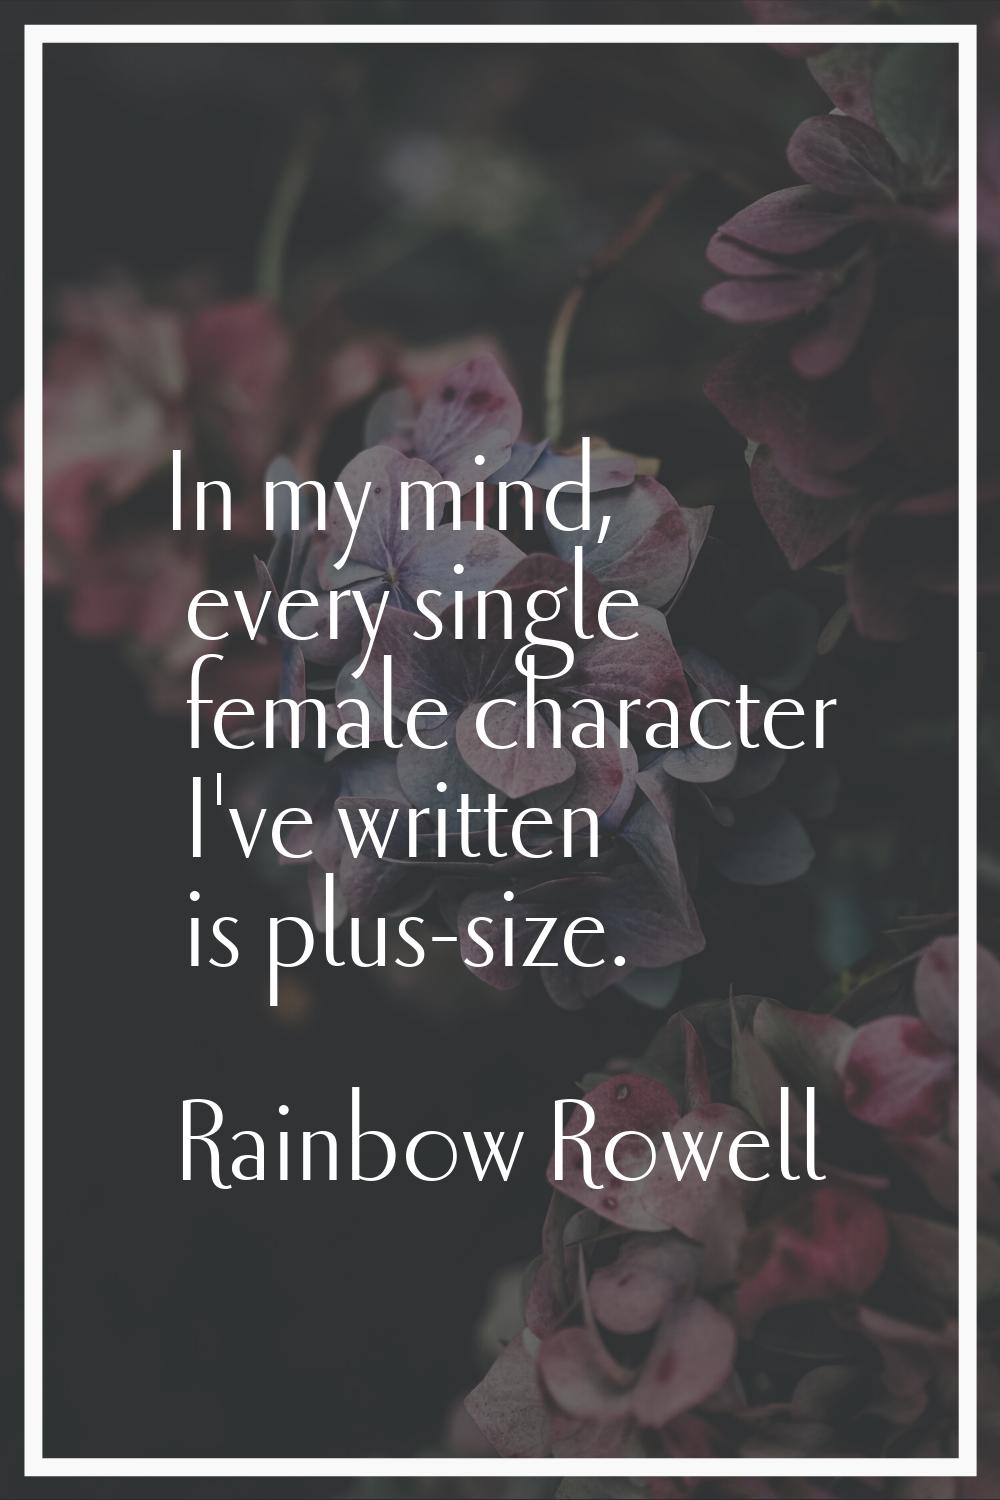 In my mind, every single female character I've written is plus-size.